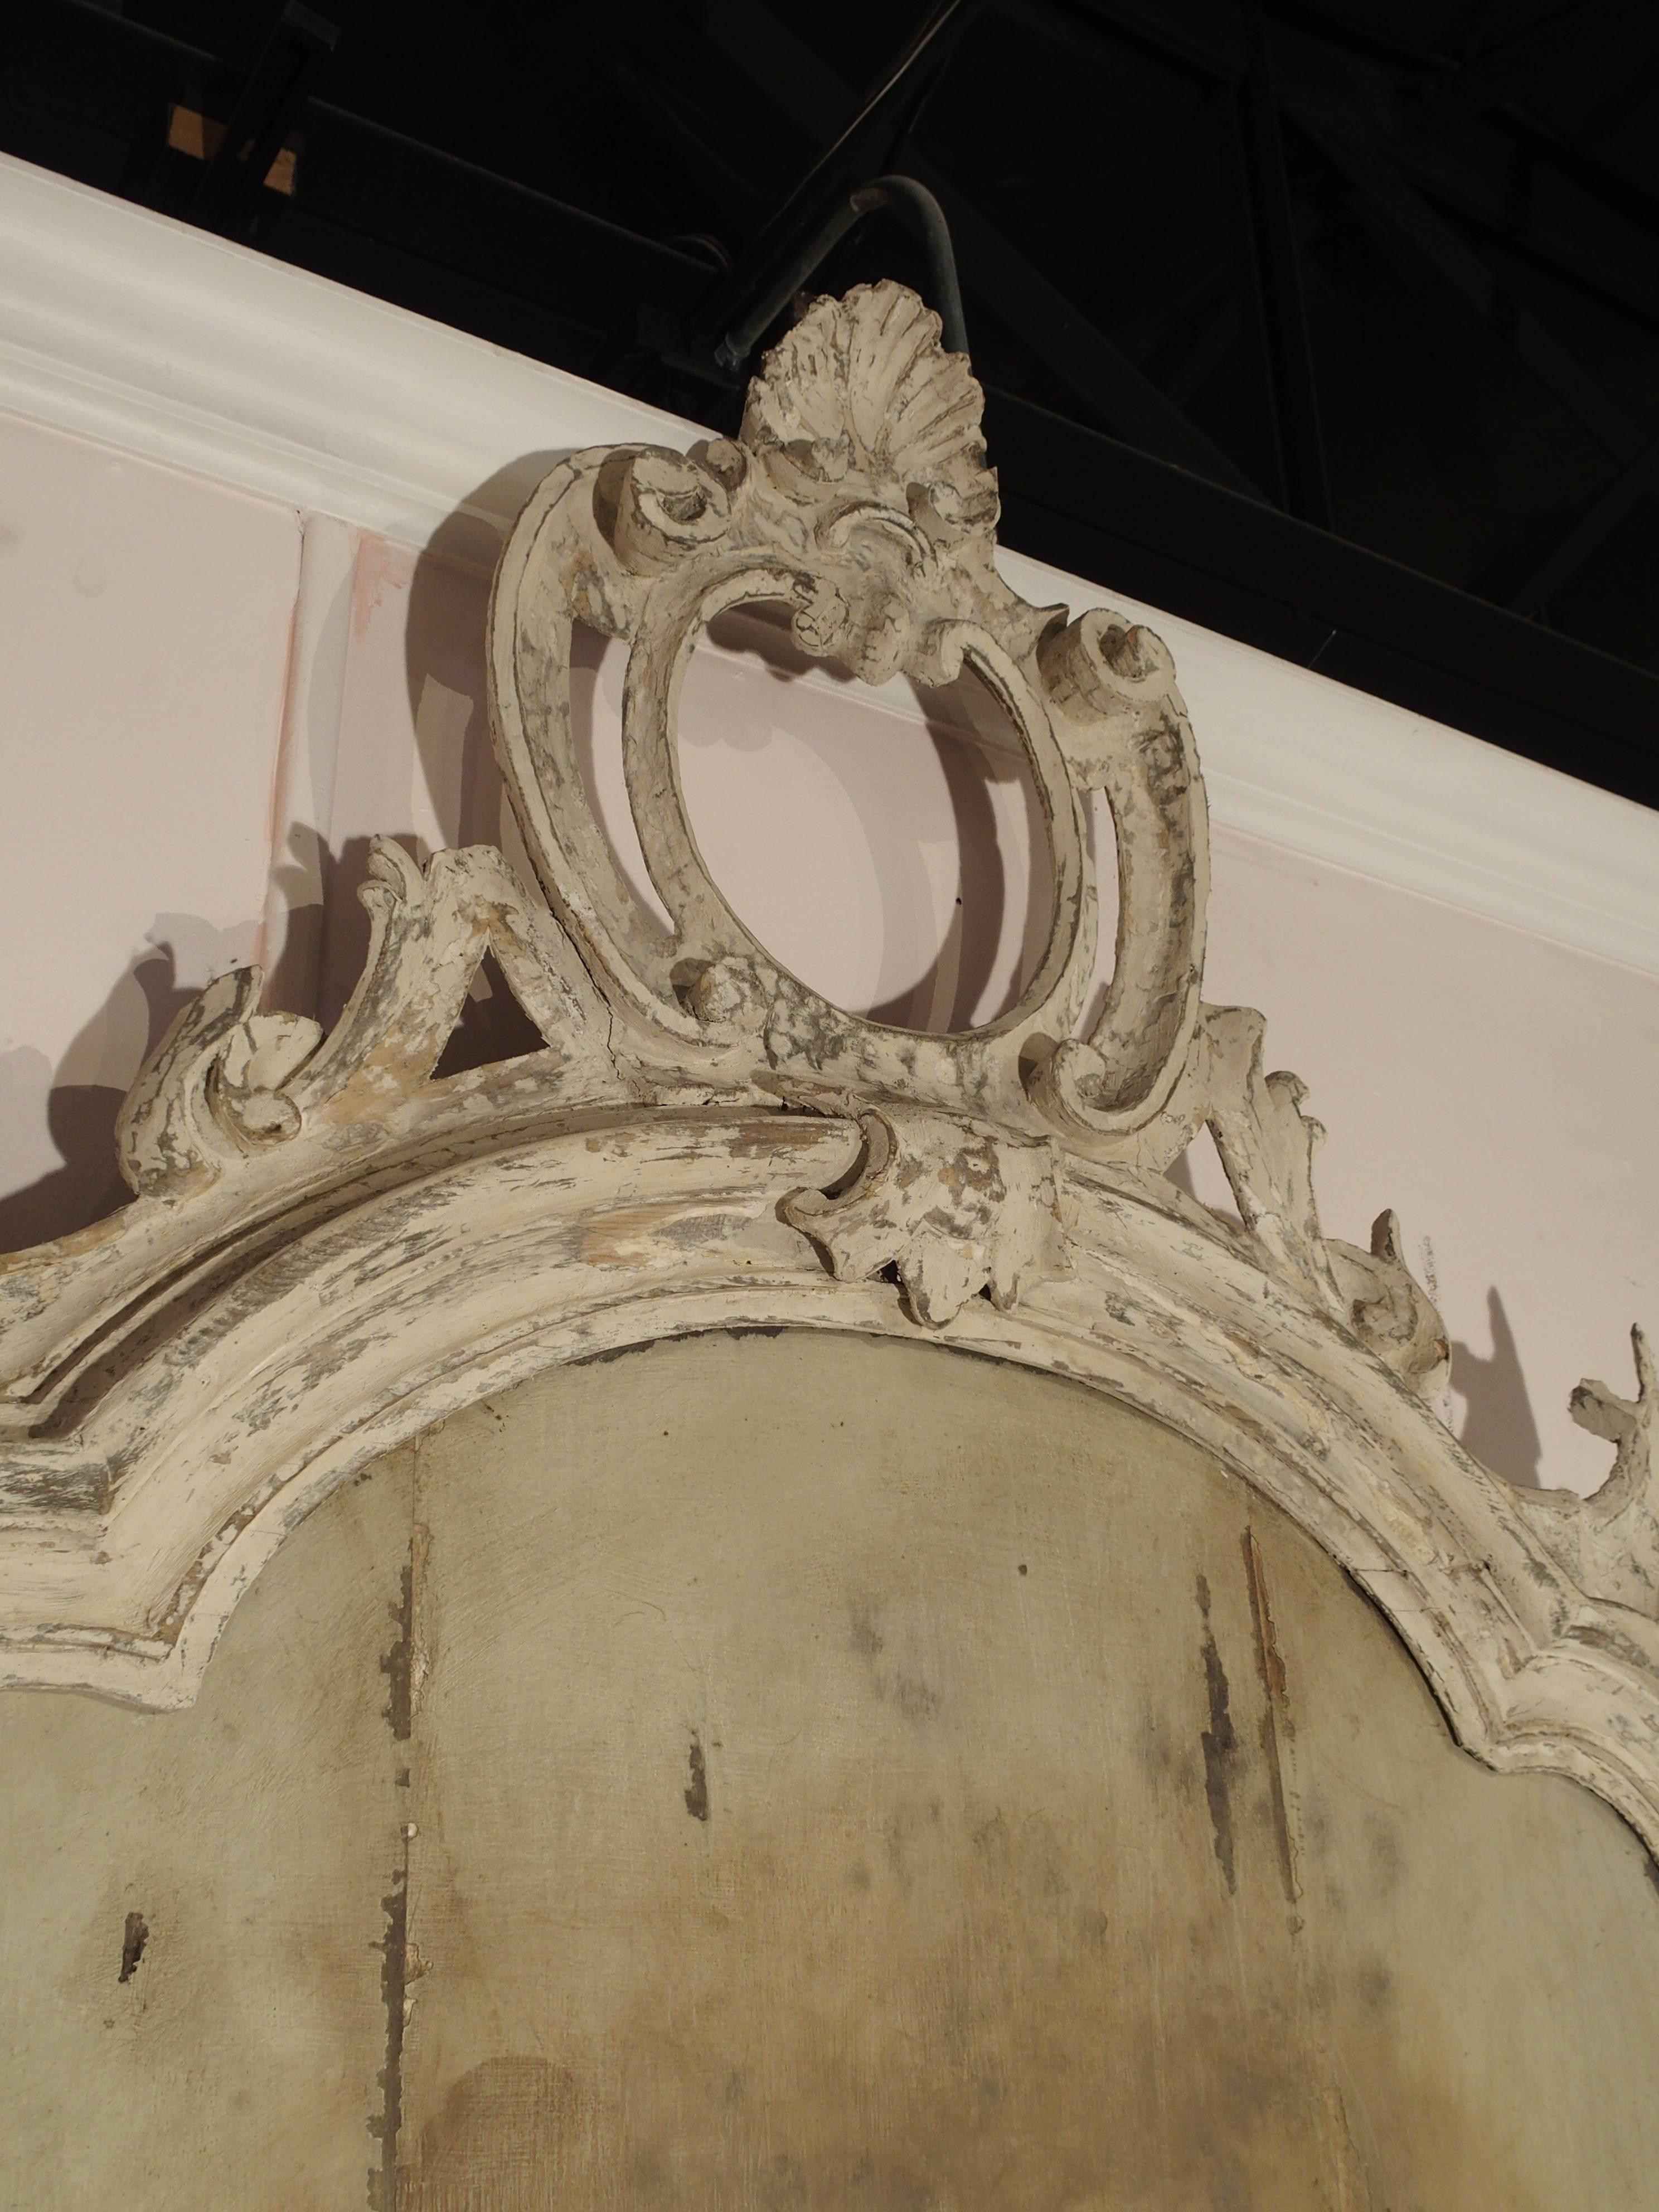 This antique Italian mirror frame is circa 1800. The glass now long gone, has been replaced by a painted scene of The Chateau Cos D'Estournel. The paint has been applied directly to the vertical back boards. The parcel paint frame is stunning with